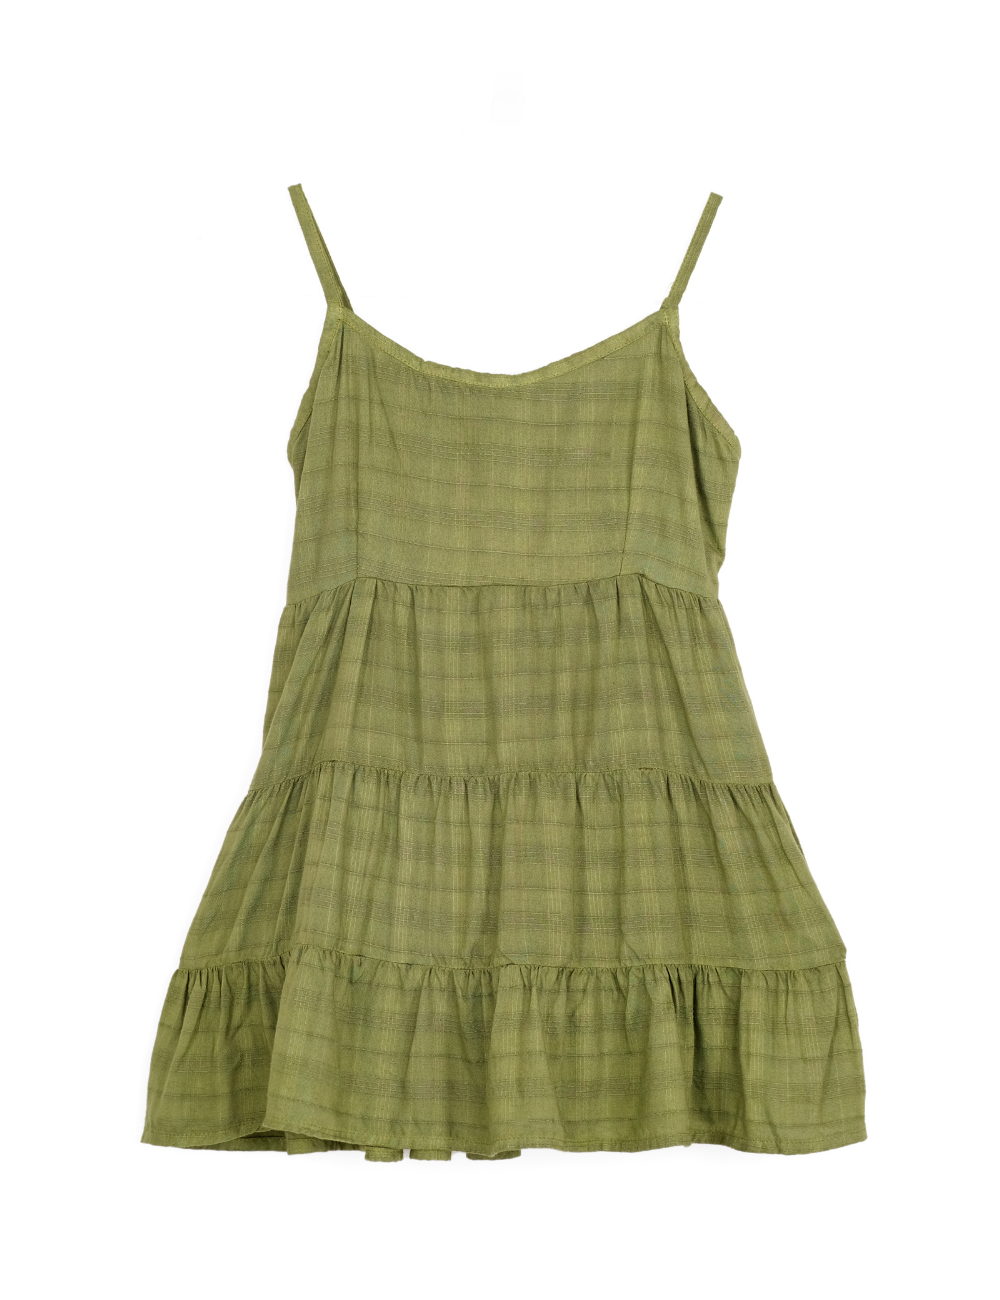 product photo of organic sugarcane kids dress in forest green colour